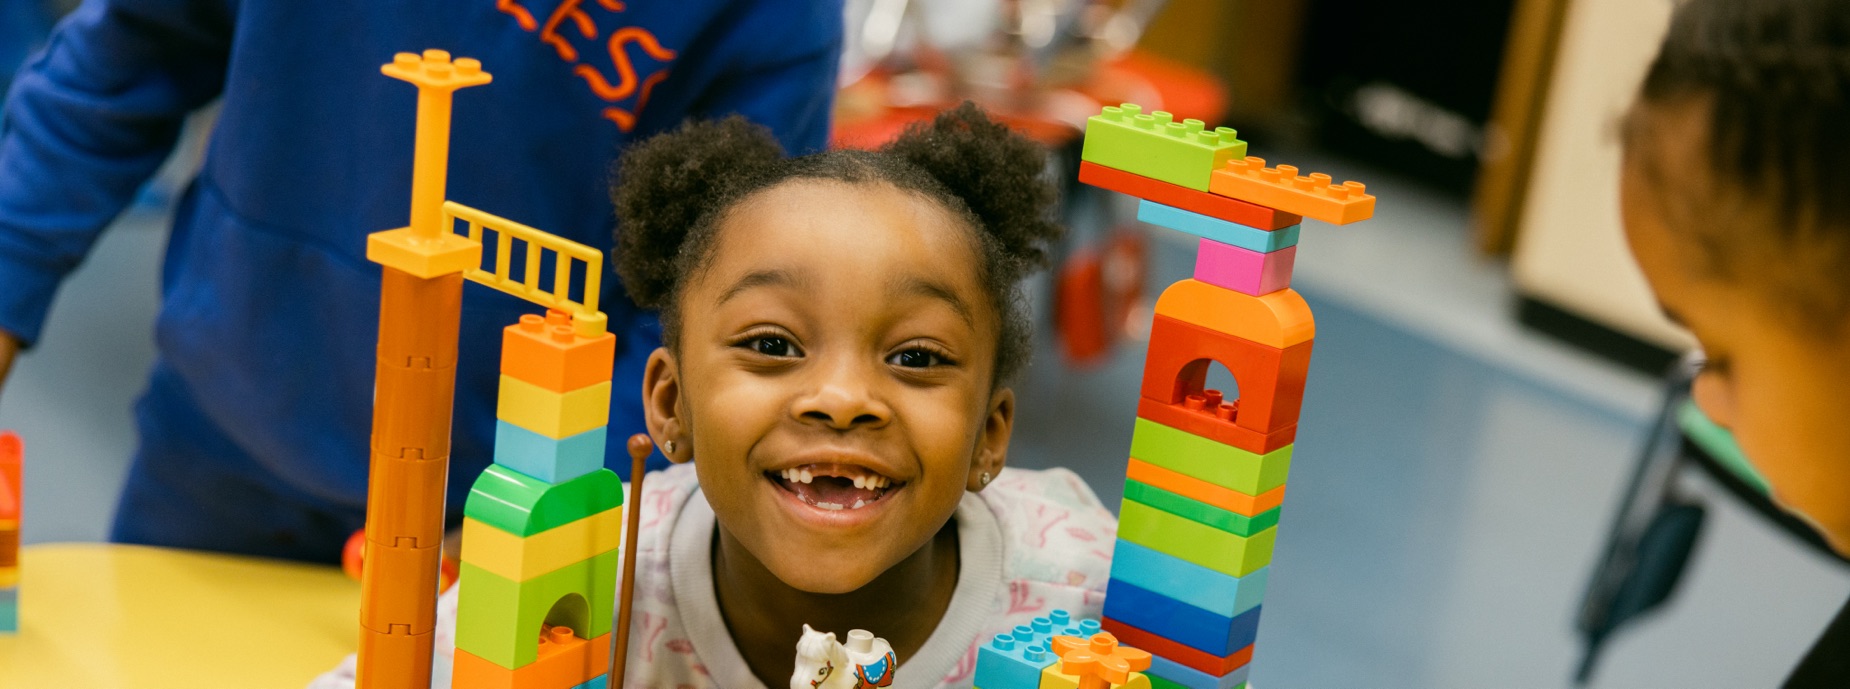 YWCA educational programs slider image of young girl smiling playing with blocks